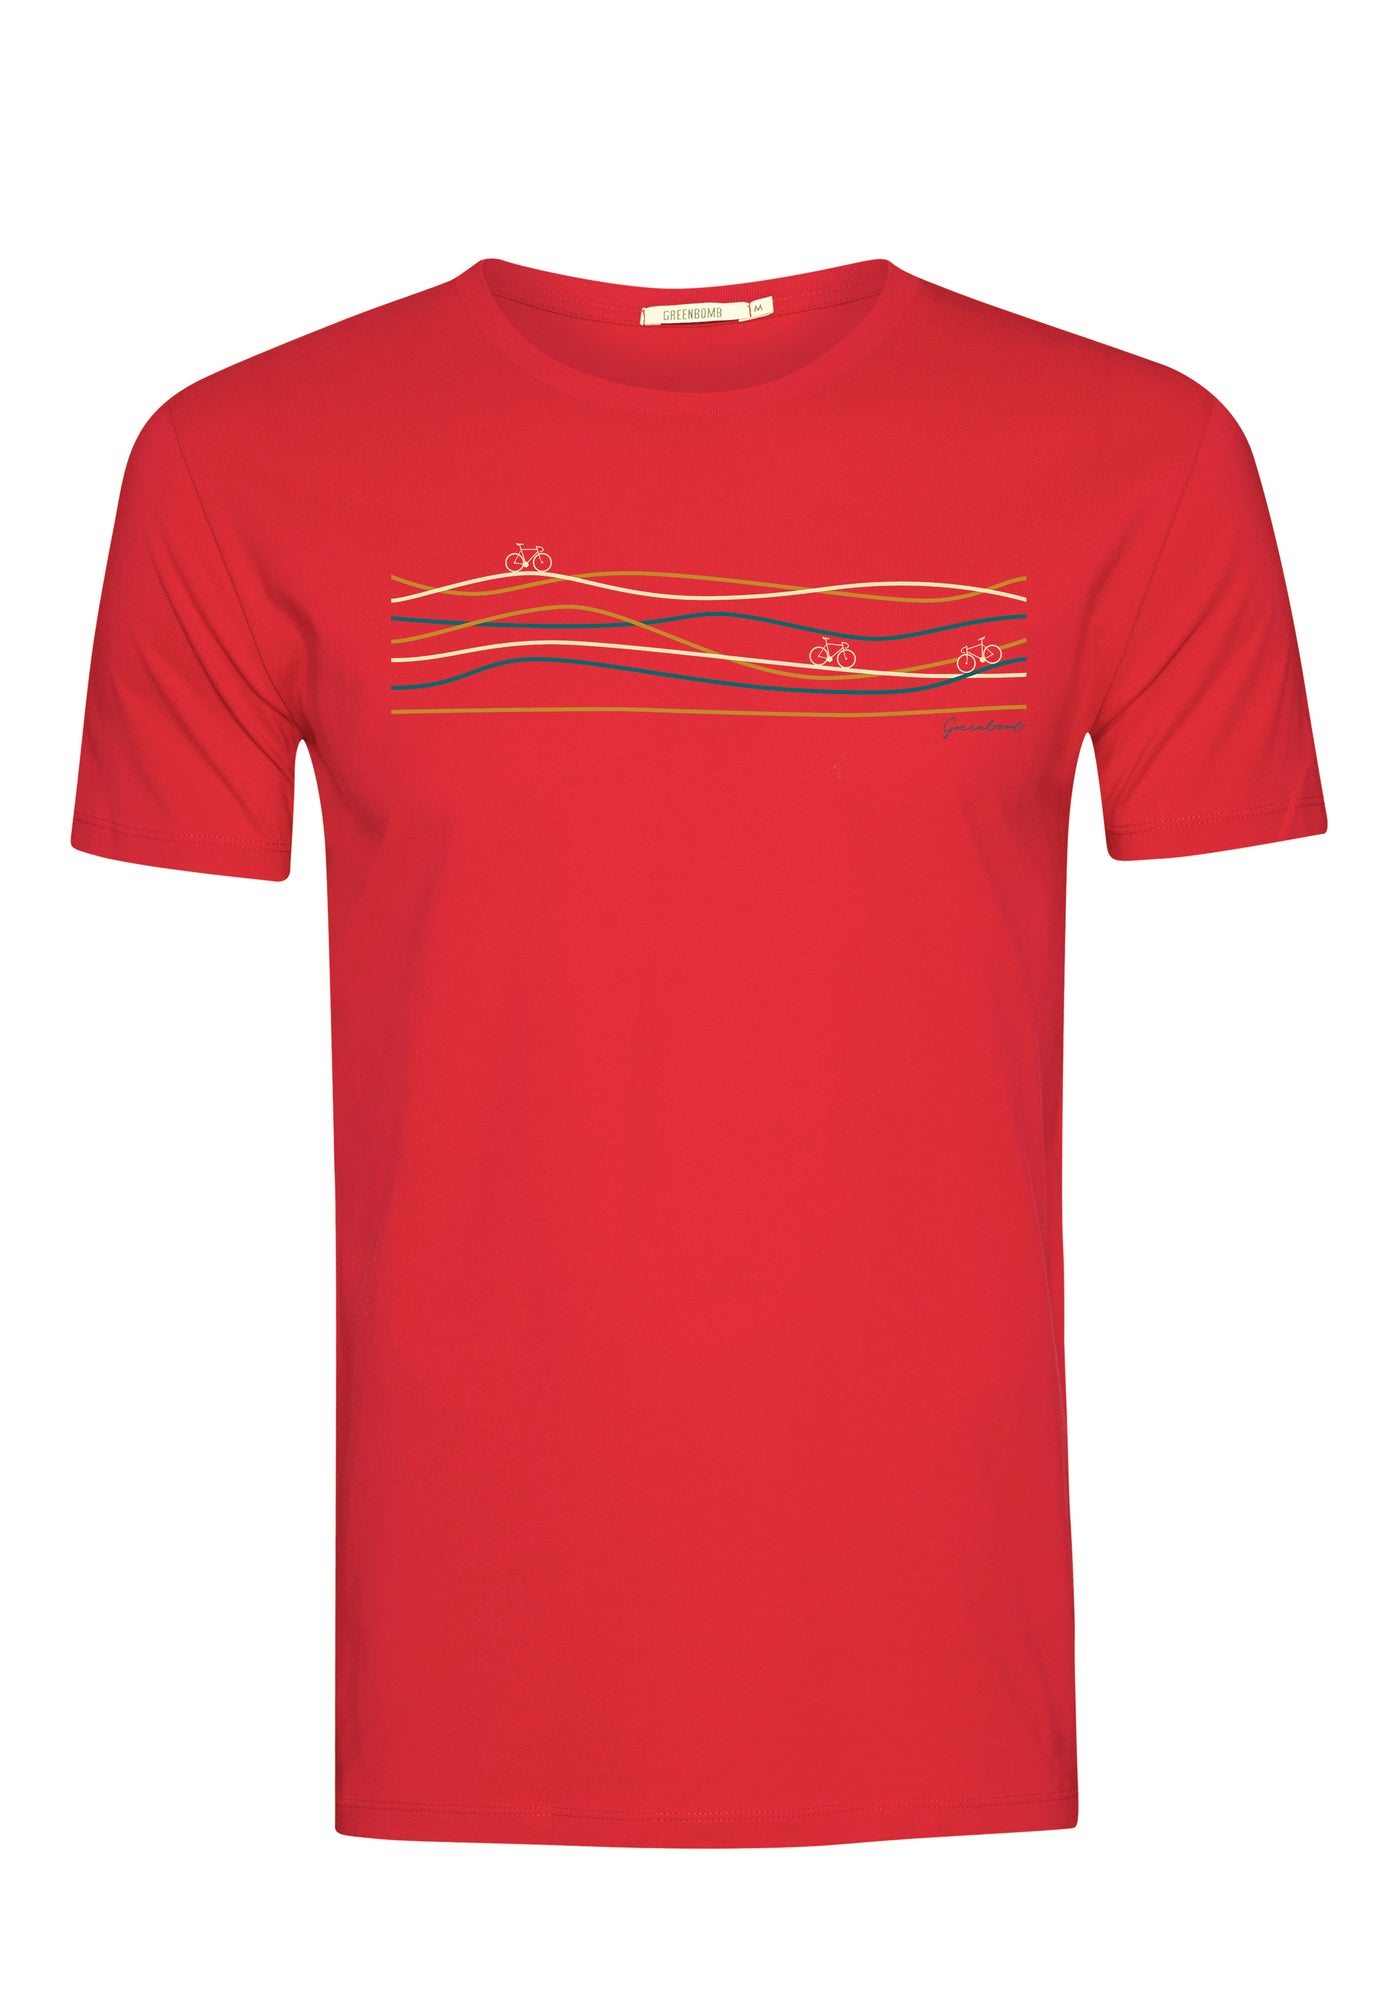 T-Shirt Bike Lanes Guide Flame Red